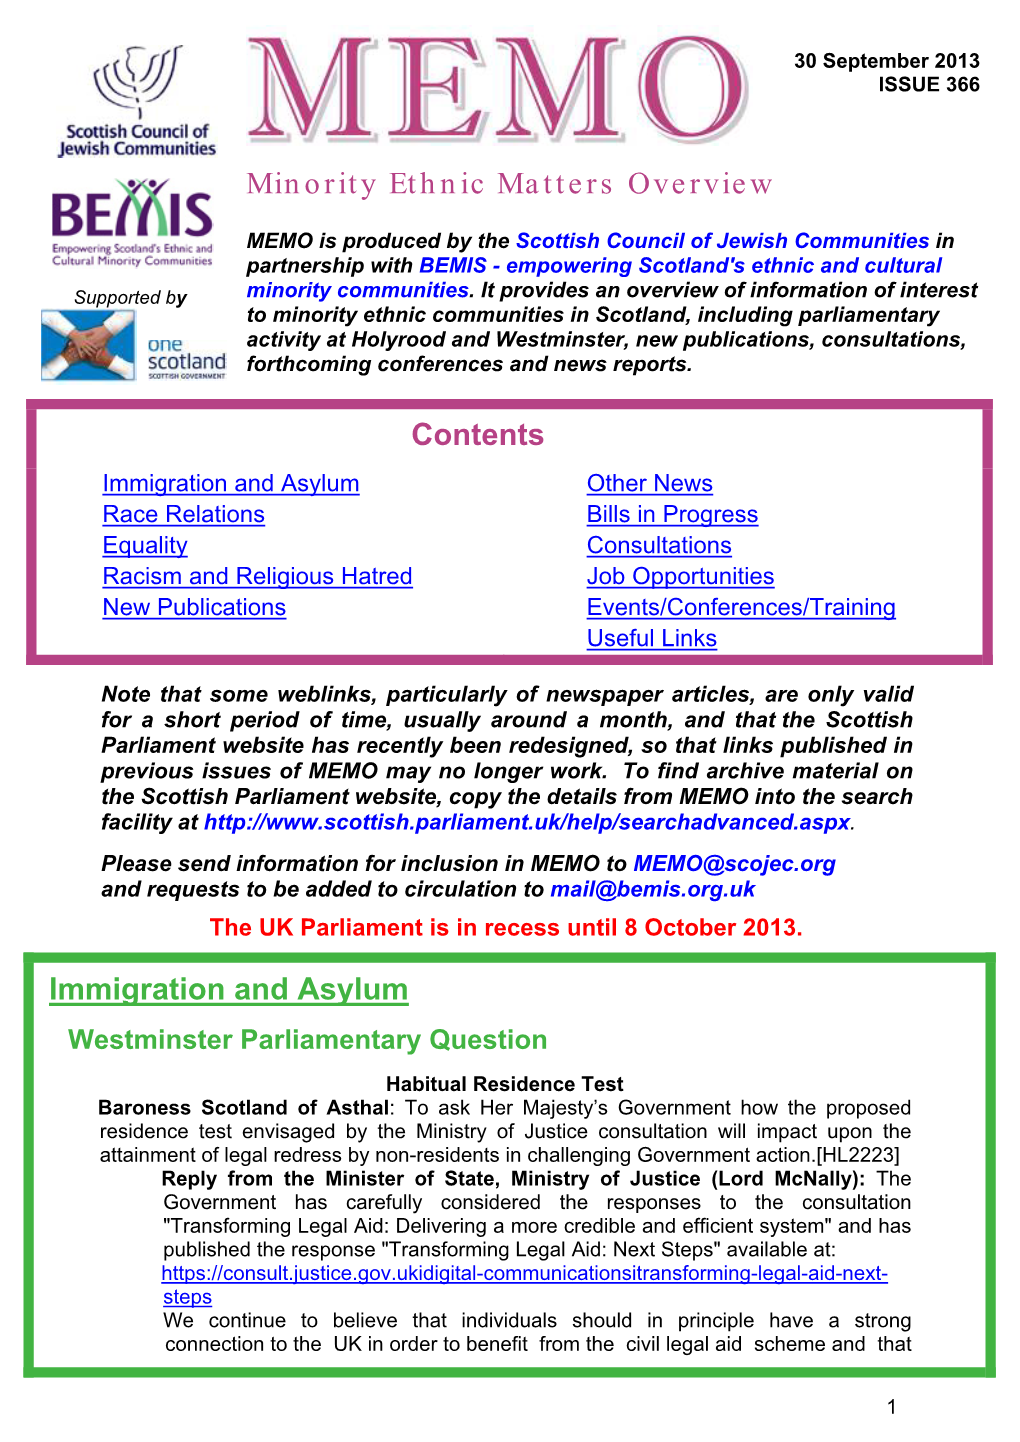 MEMO Is Produced by the Scottish Council of Jewish Communities in Partnership with BEMIS - Empowering Scotland's Ethnic and Cultural